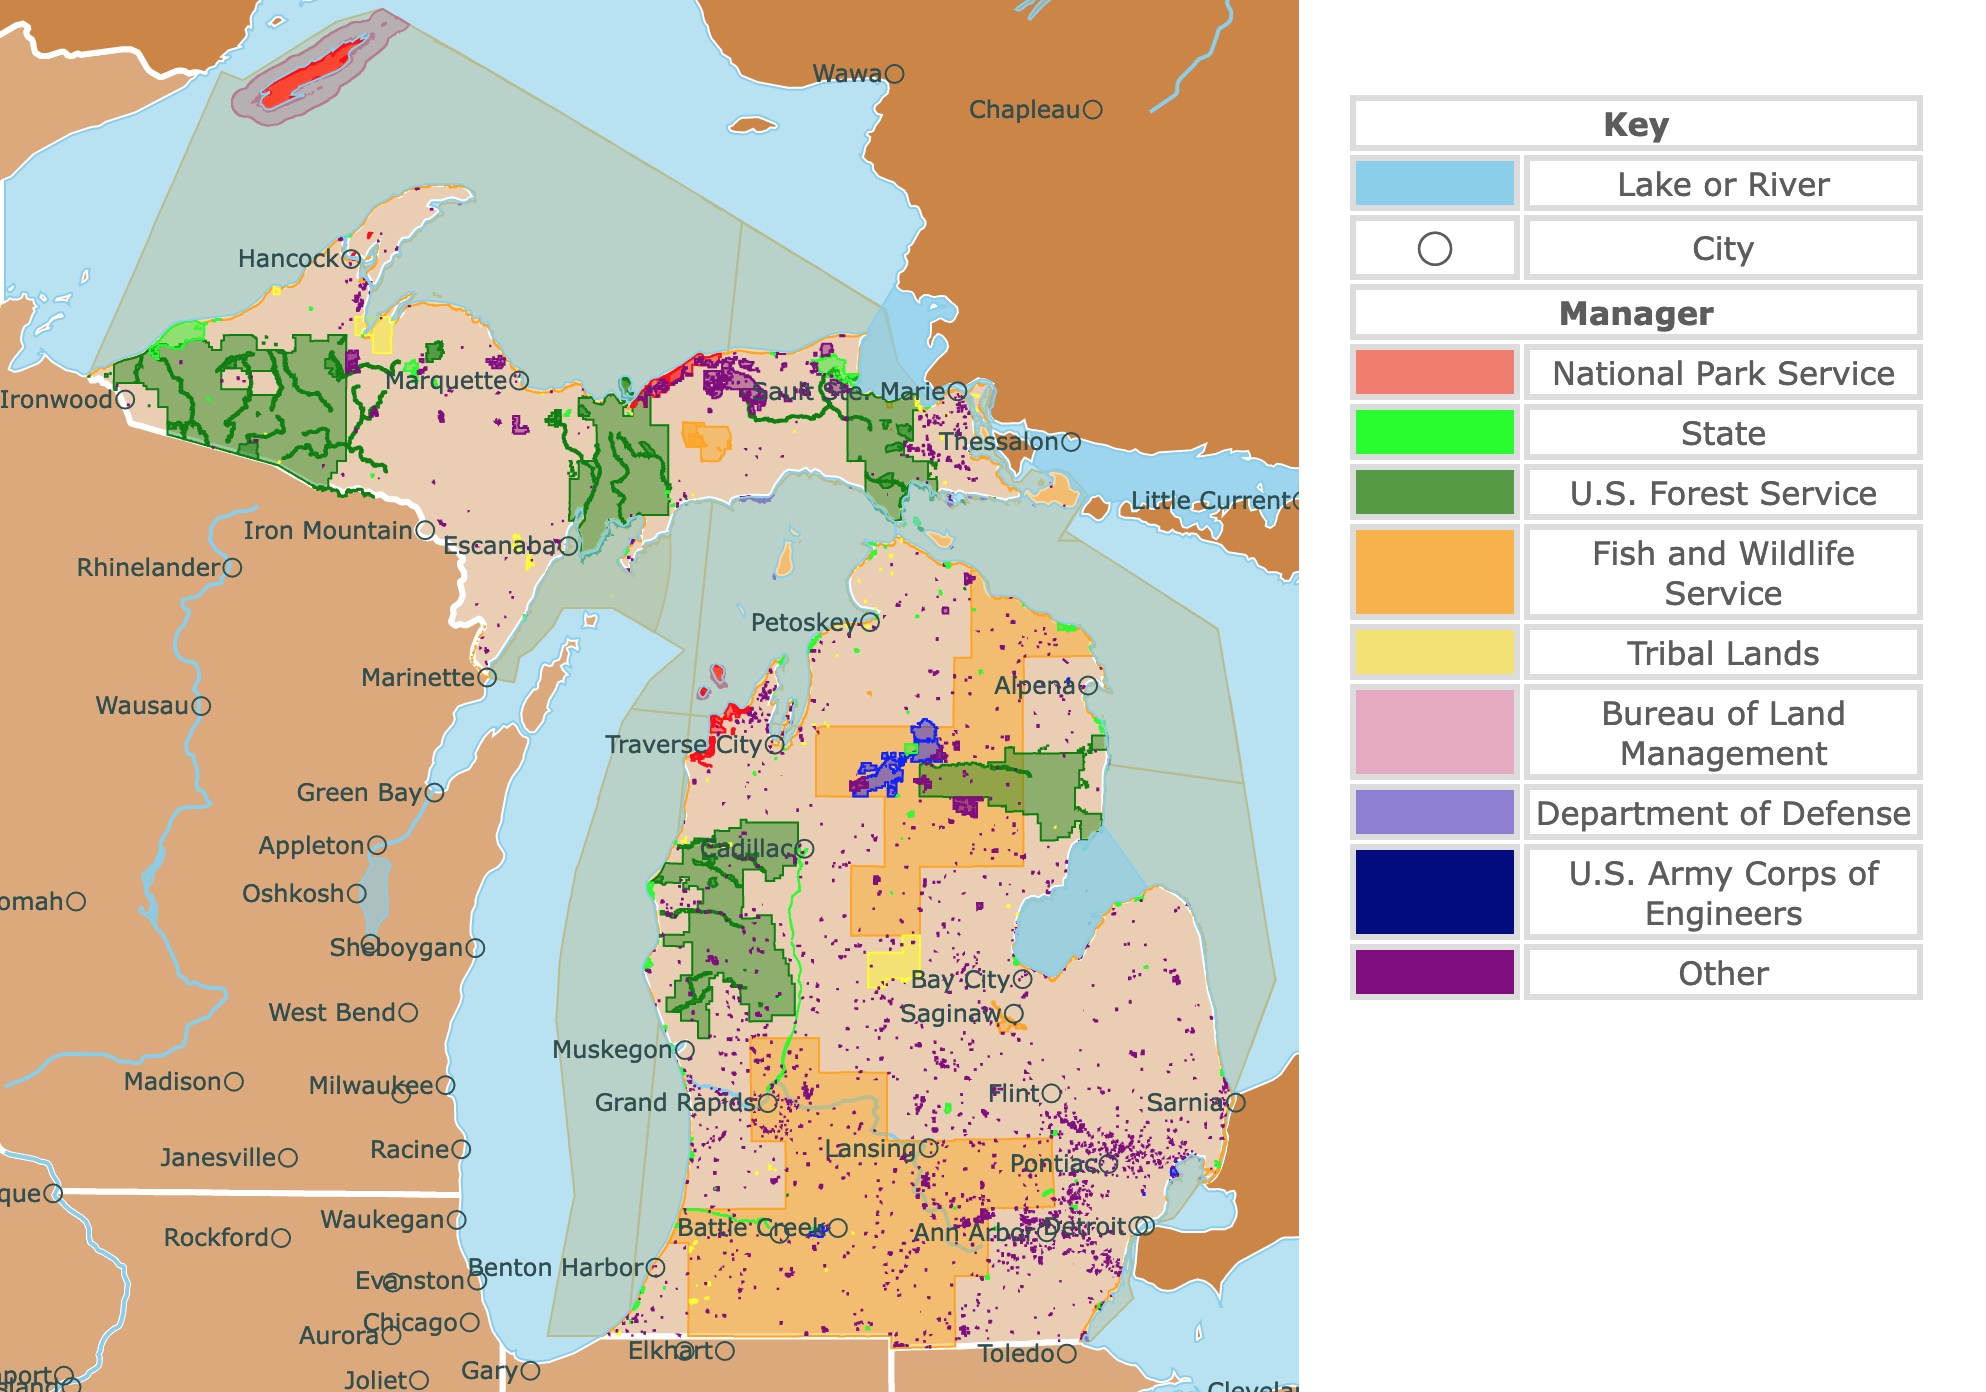 Map of Michigan's state parks, national parks, forests, and public lands areas